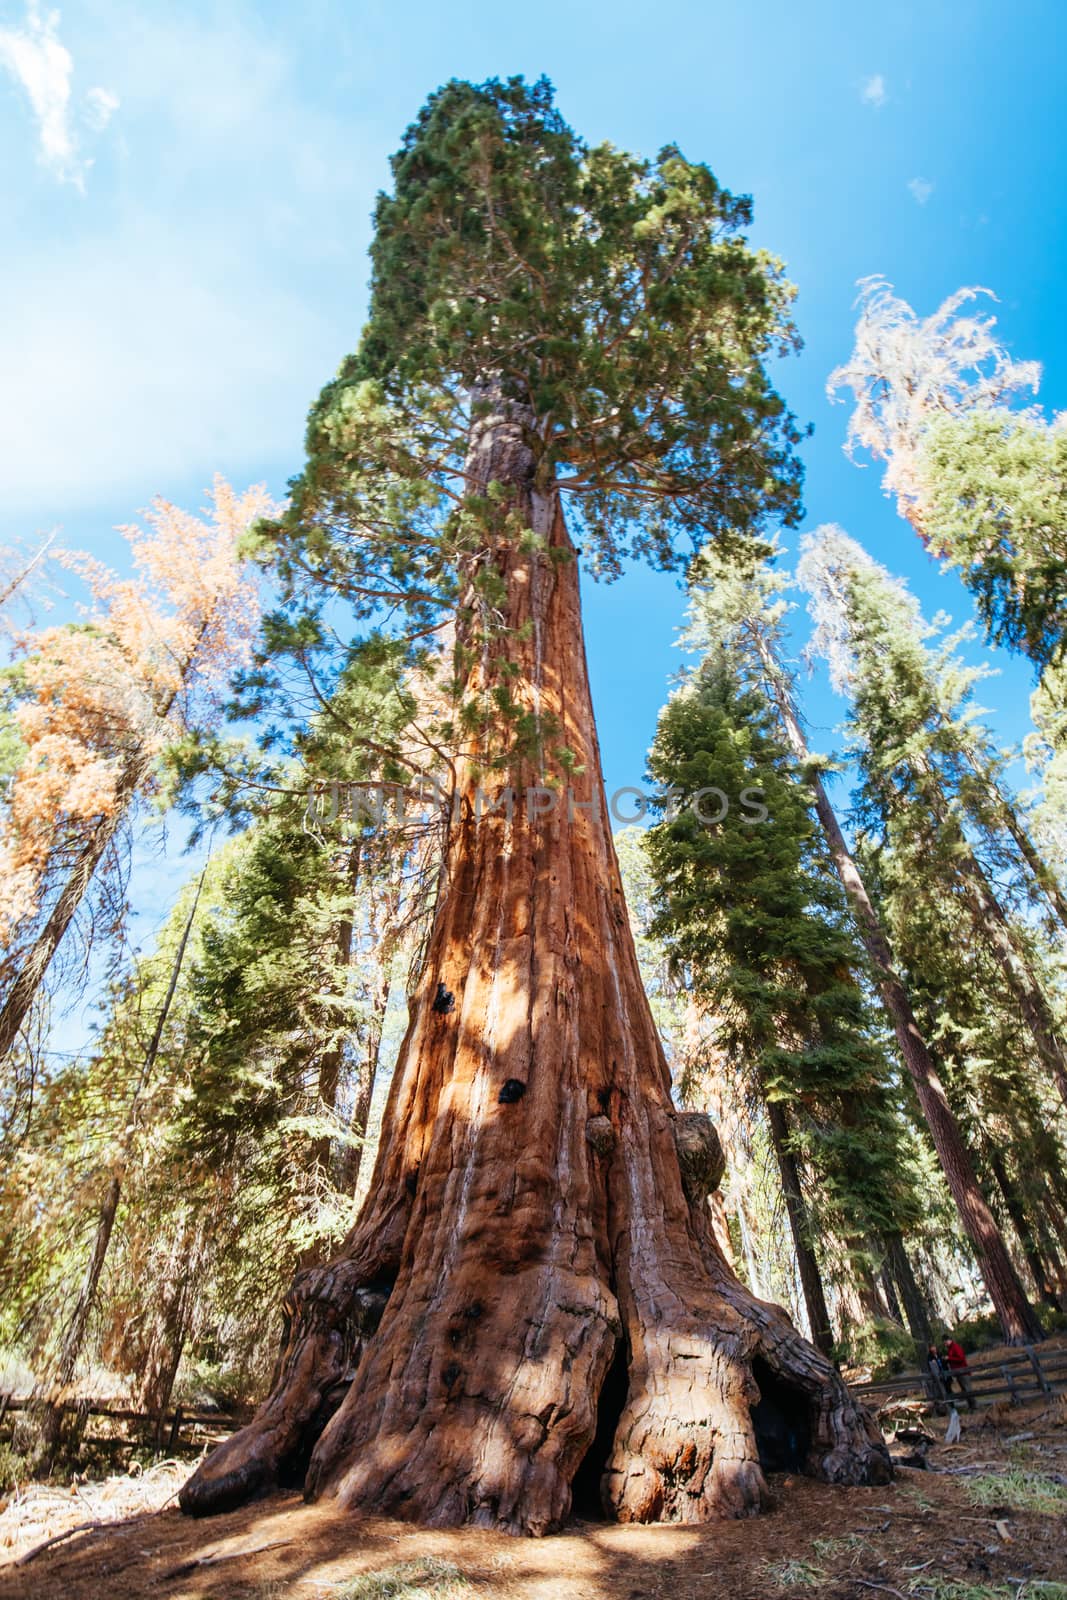 The famous General Grant tree in Sequoia National Park, California, USA